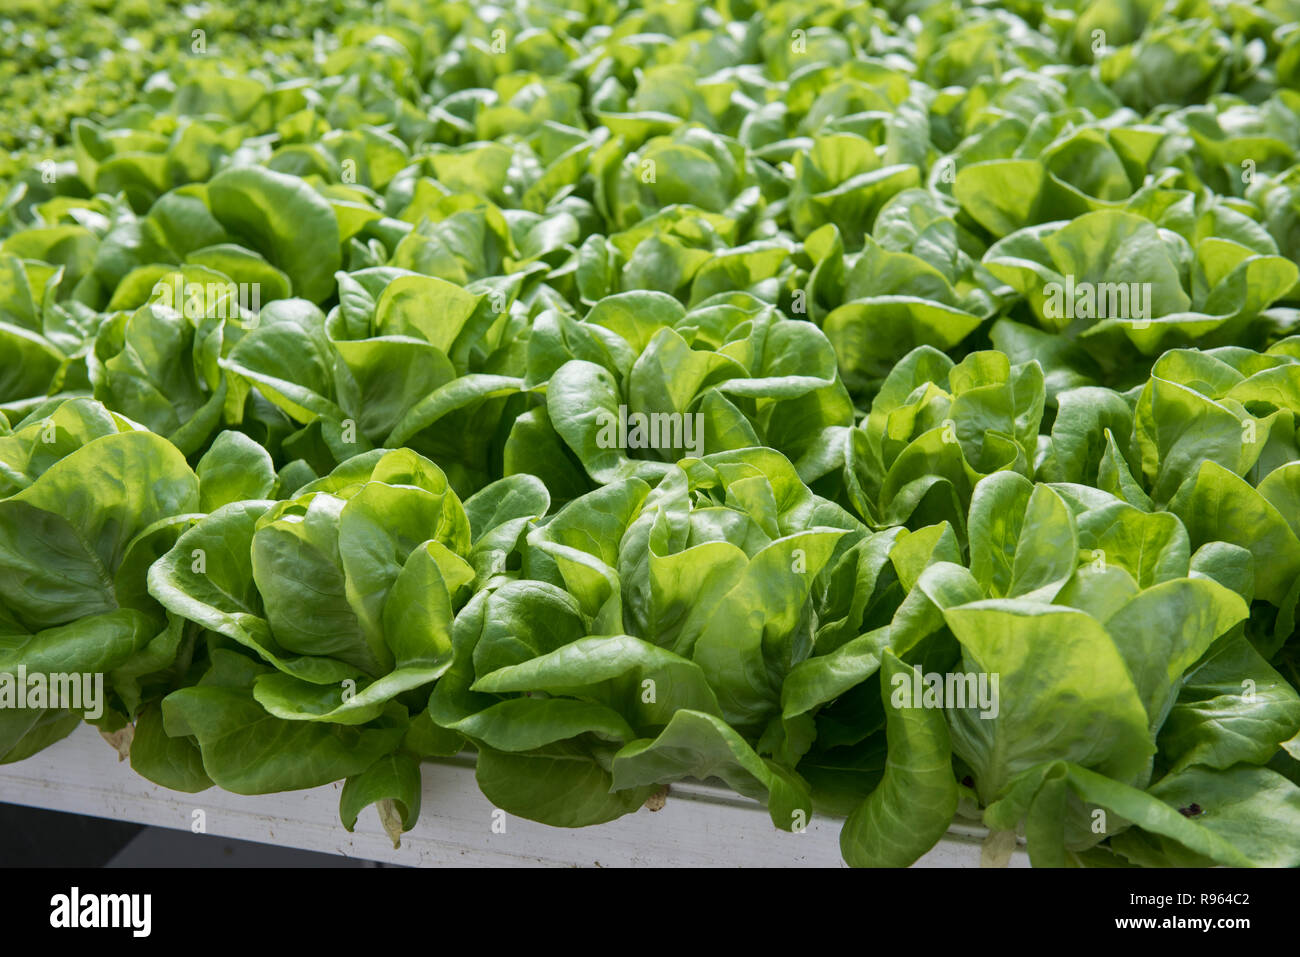 Image of lush green cabbage vegetation through Hydroponics style. The cabbage plants look very fresh and is definitely well cared of. Stock Photo